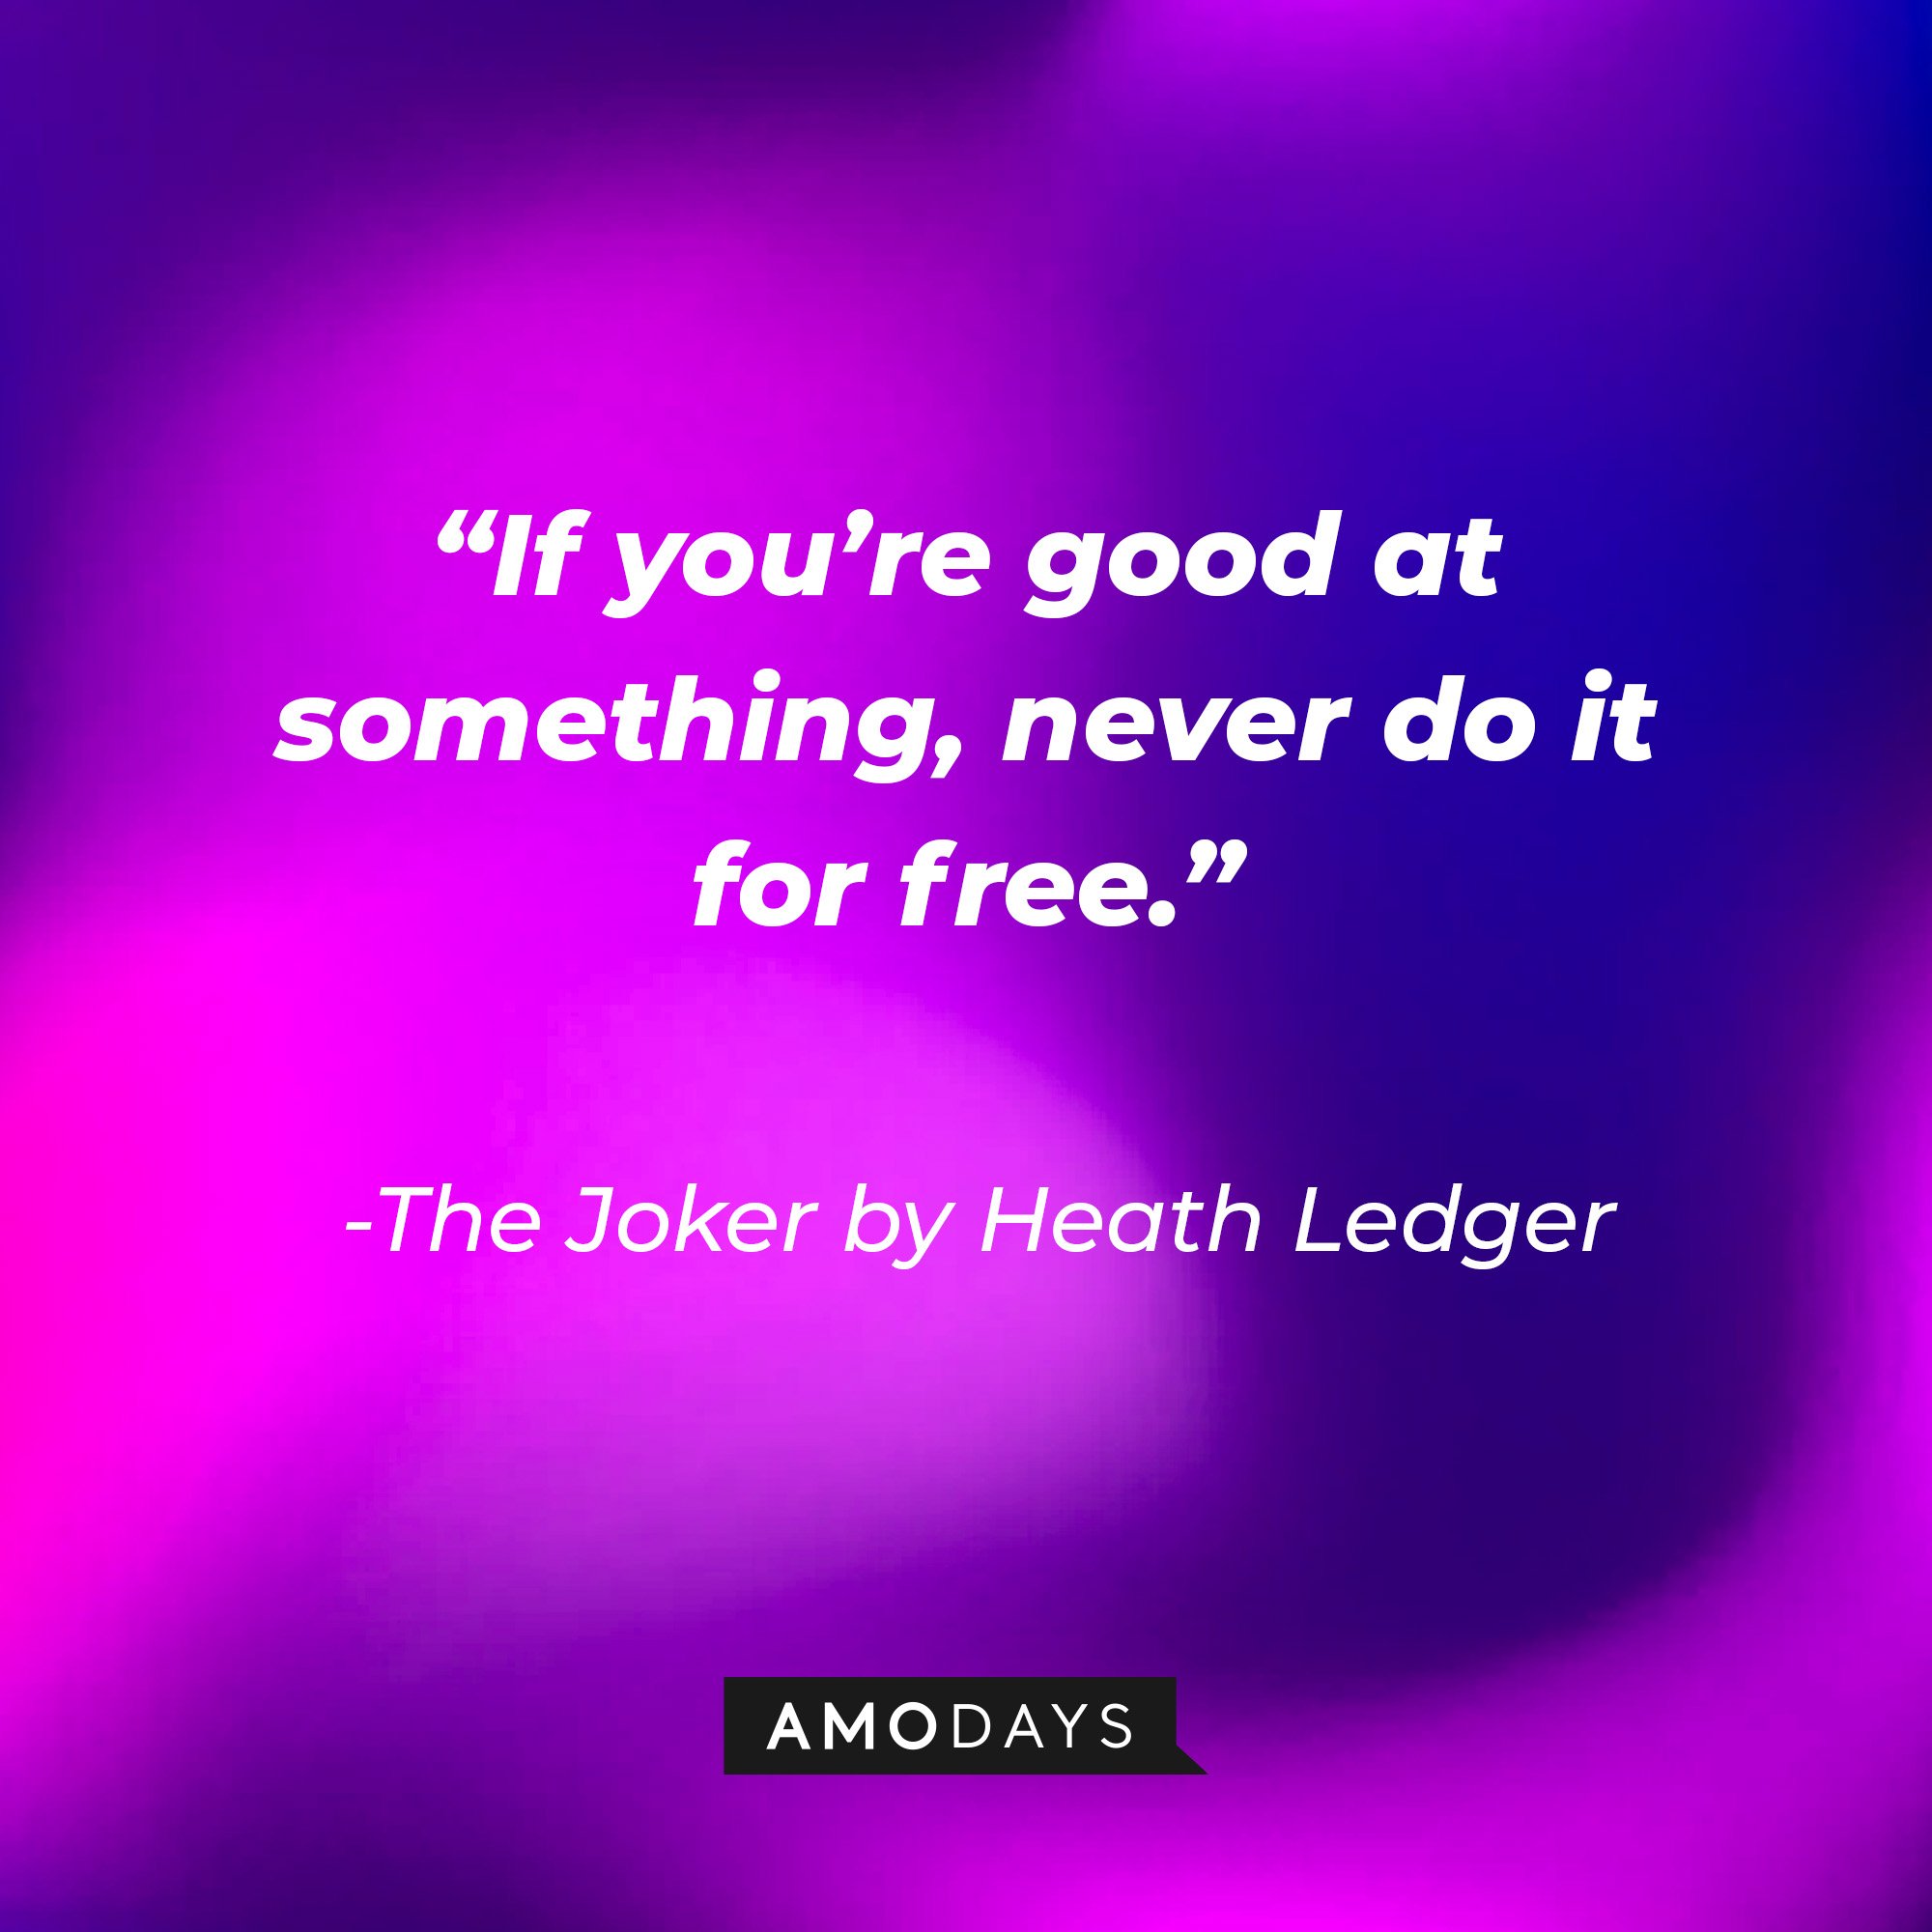 The Joker in Christopher Nolan’s “The Dark Night” quote: “If you’re good at something never do it for free.” | Image: Amodays